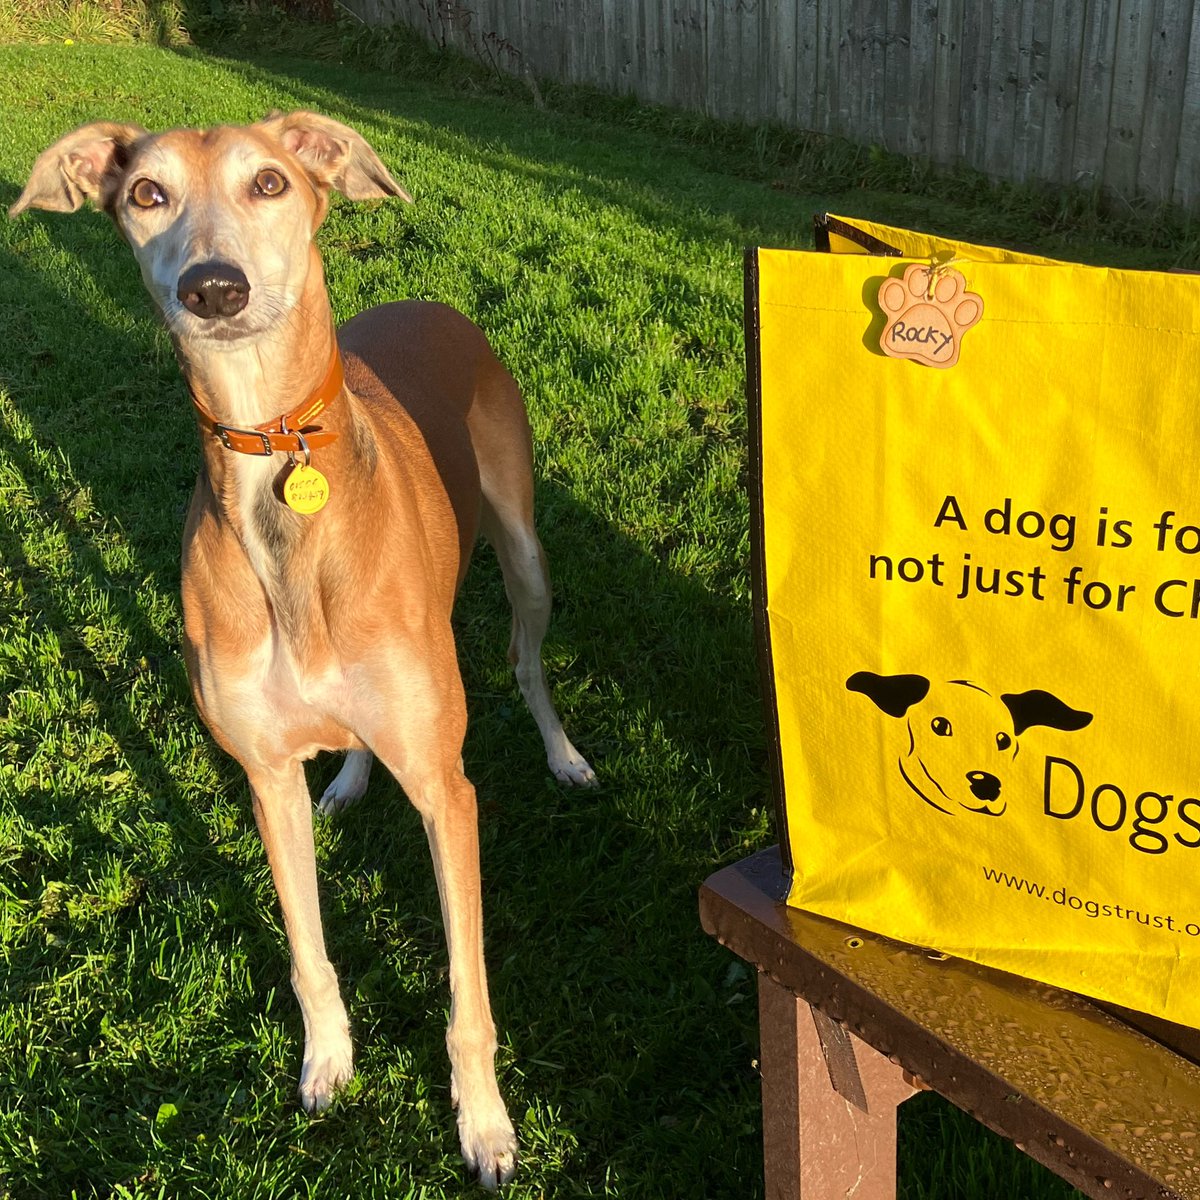 What an exciting start to the day for handsome Rocky! 🐶 He couldn’t wait to pack his bags and head to his furever home 🏡 We hope he enjoys lots of zoomies and cuddles with his new family 💛 #BagPacked #AdoptDontShop #ADogIsForLife @dogstrust